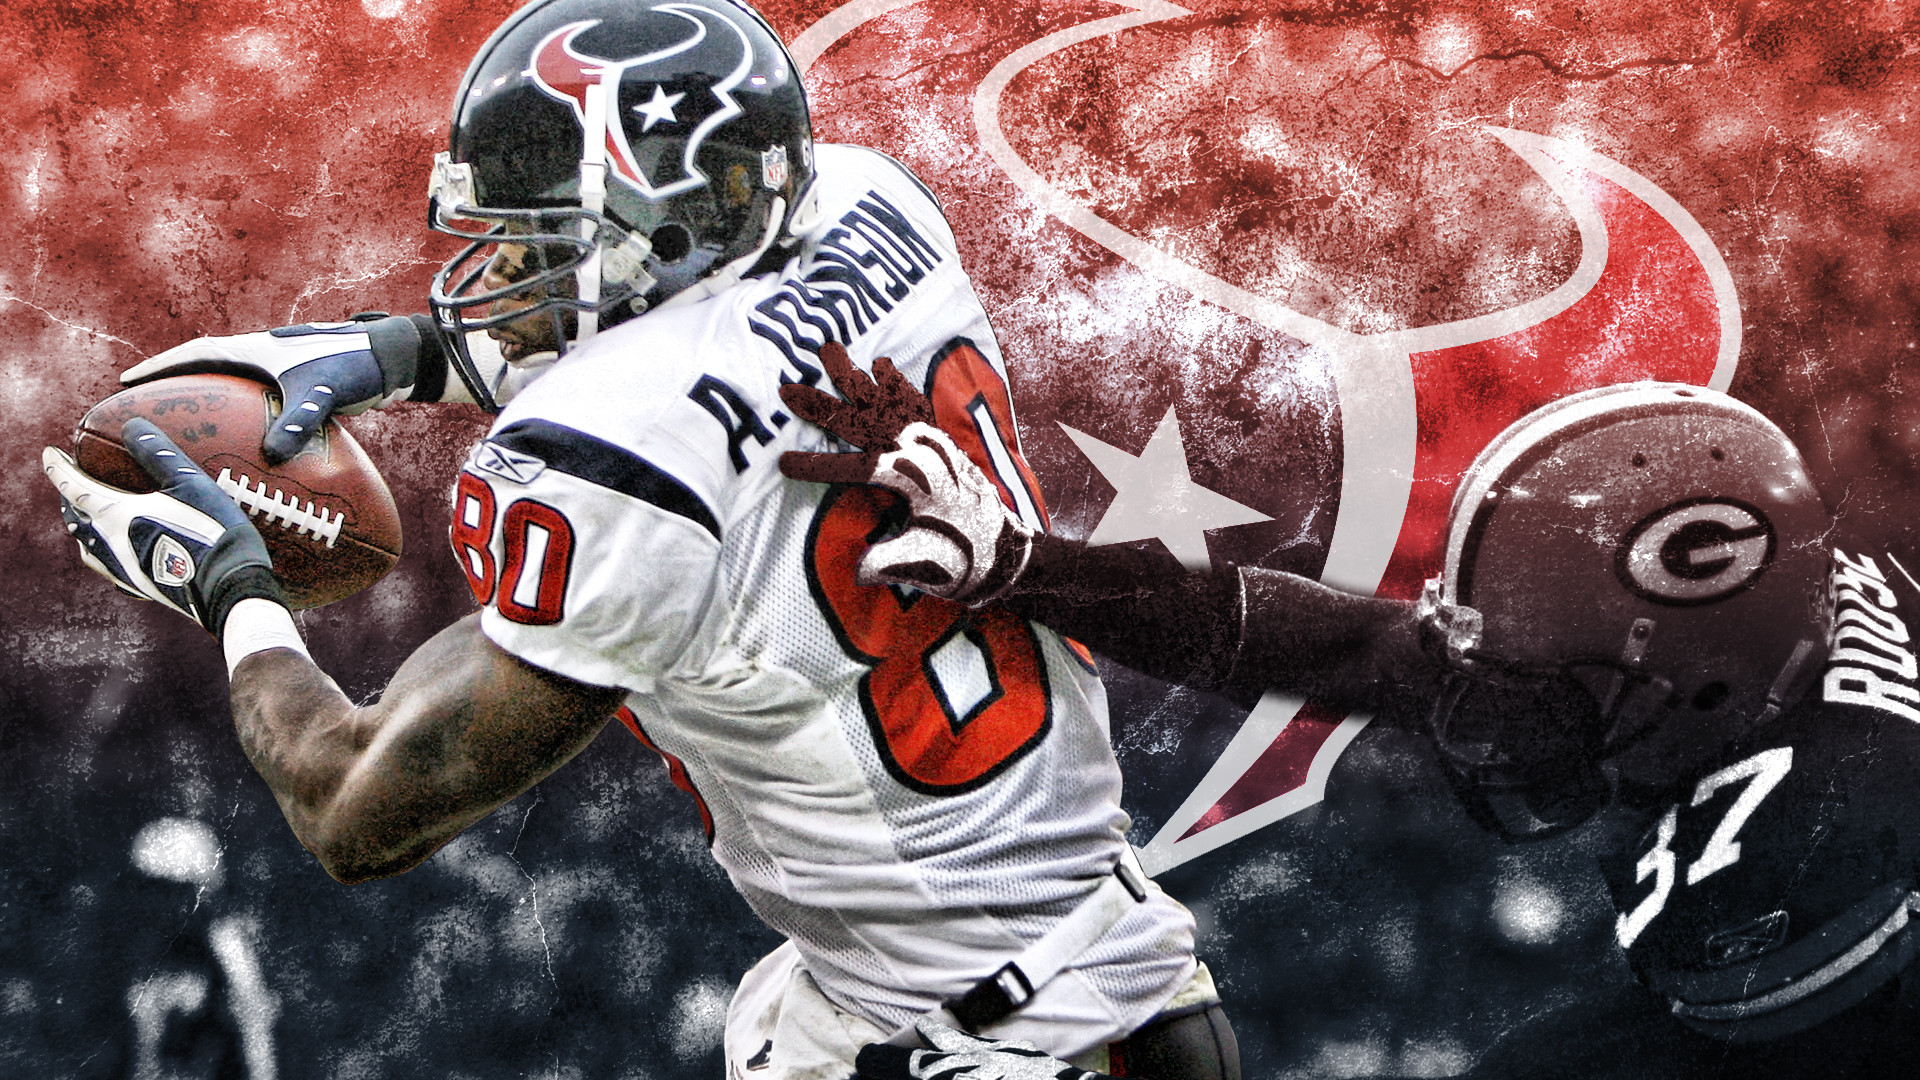 1920x1080 Houston Texans 3D Backgrounds, HQ, Kerrie Bythway